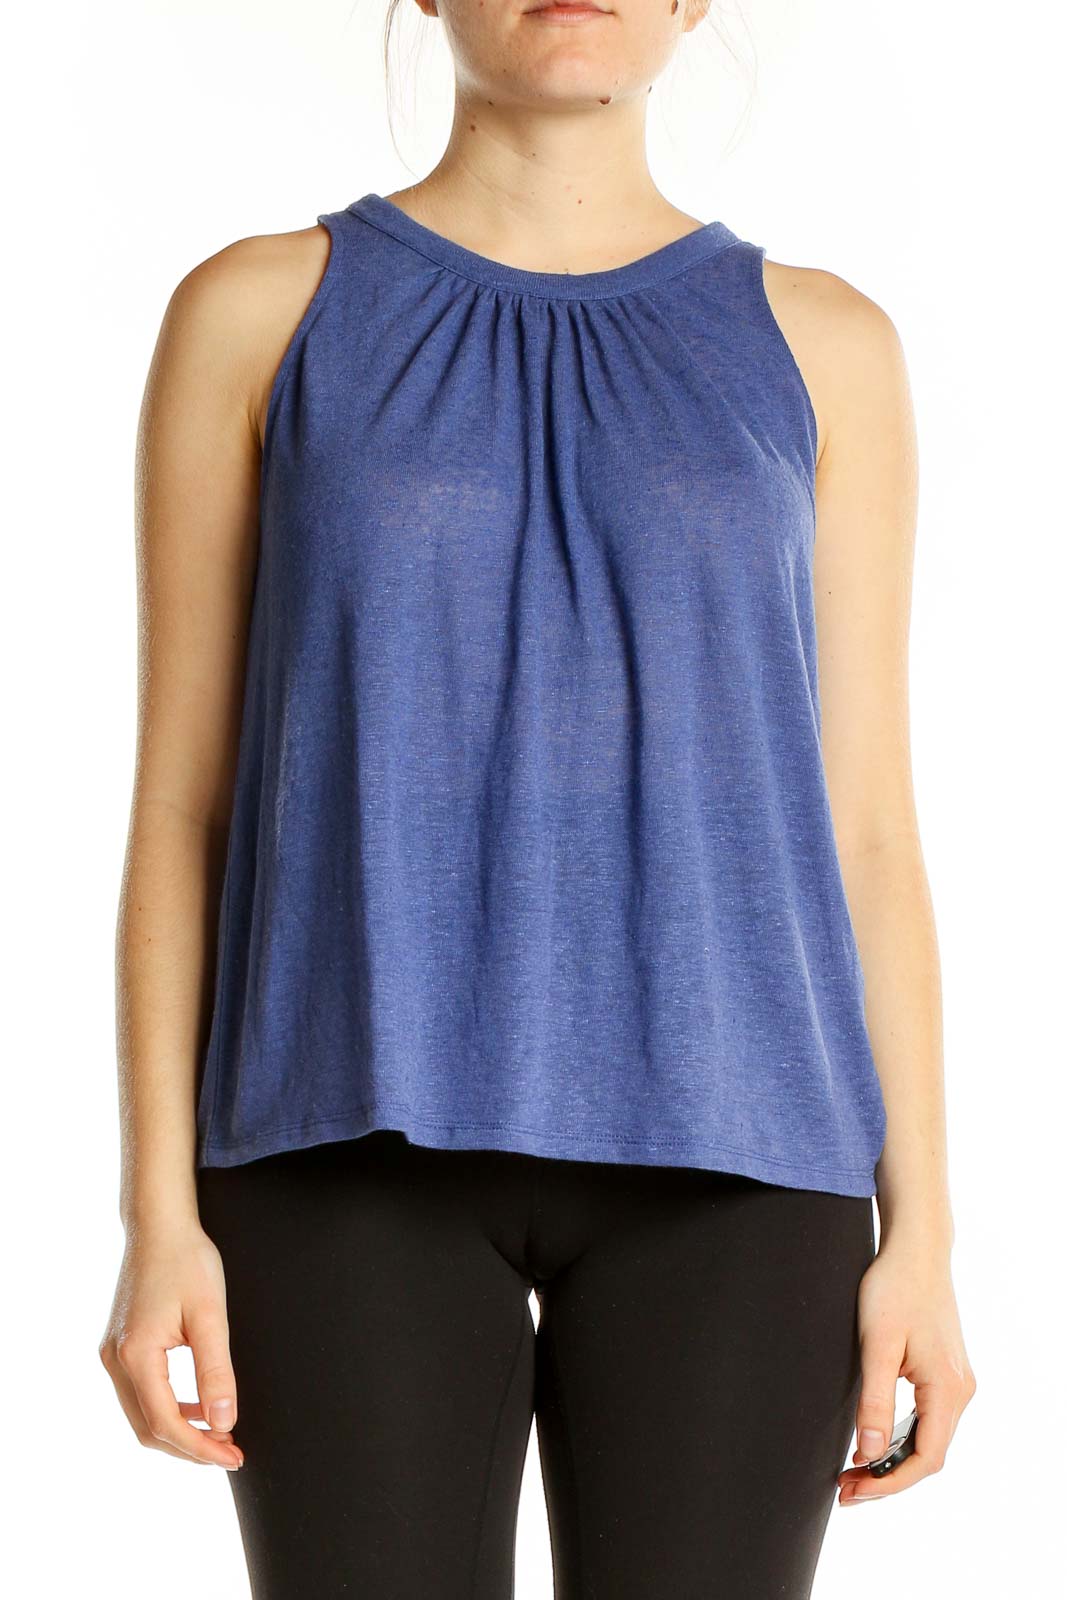 Blue Sleeveless Top Front